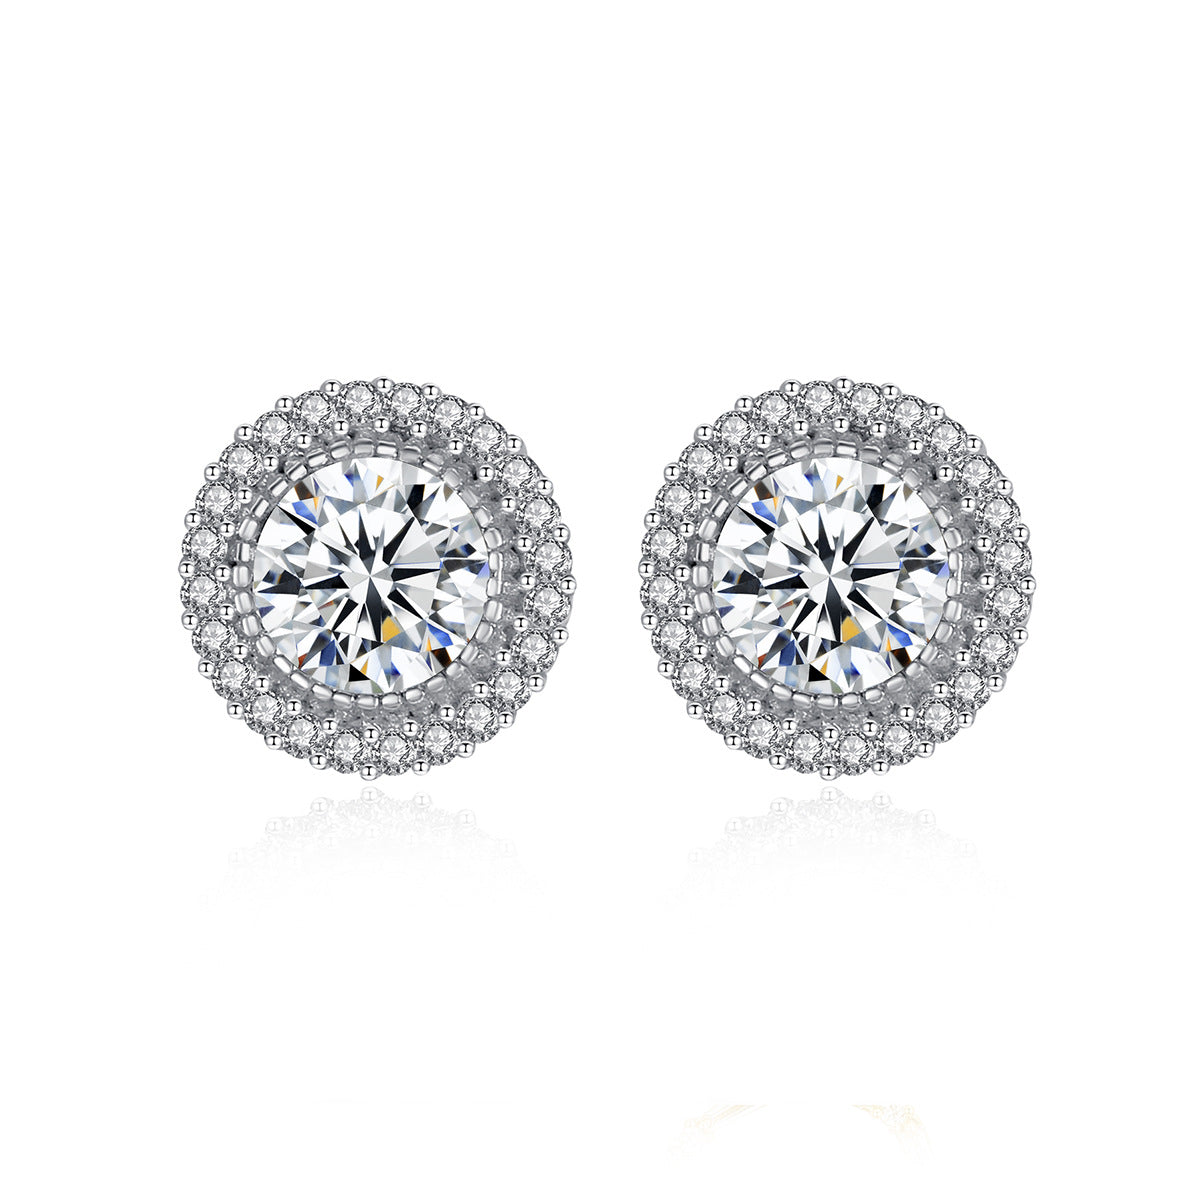 Round Cut Solitaire Earrings (925 Sterling Silver)